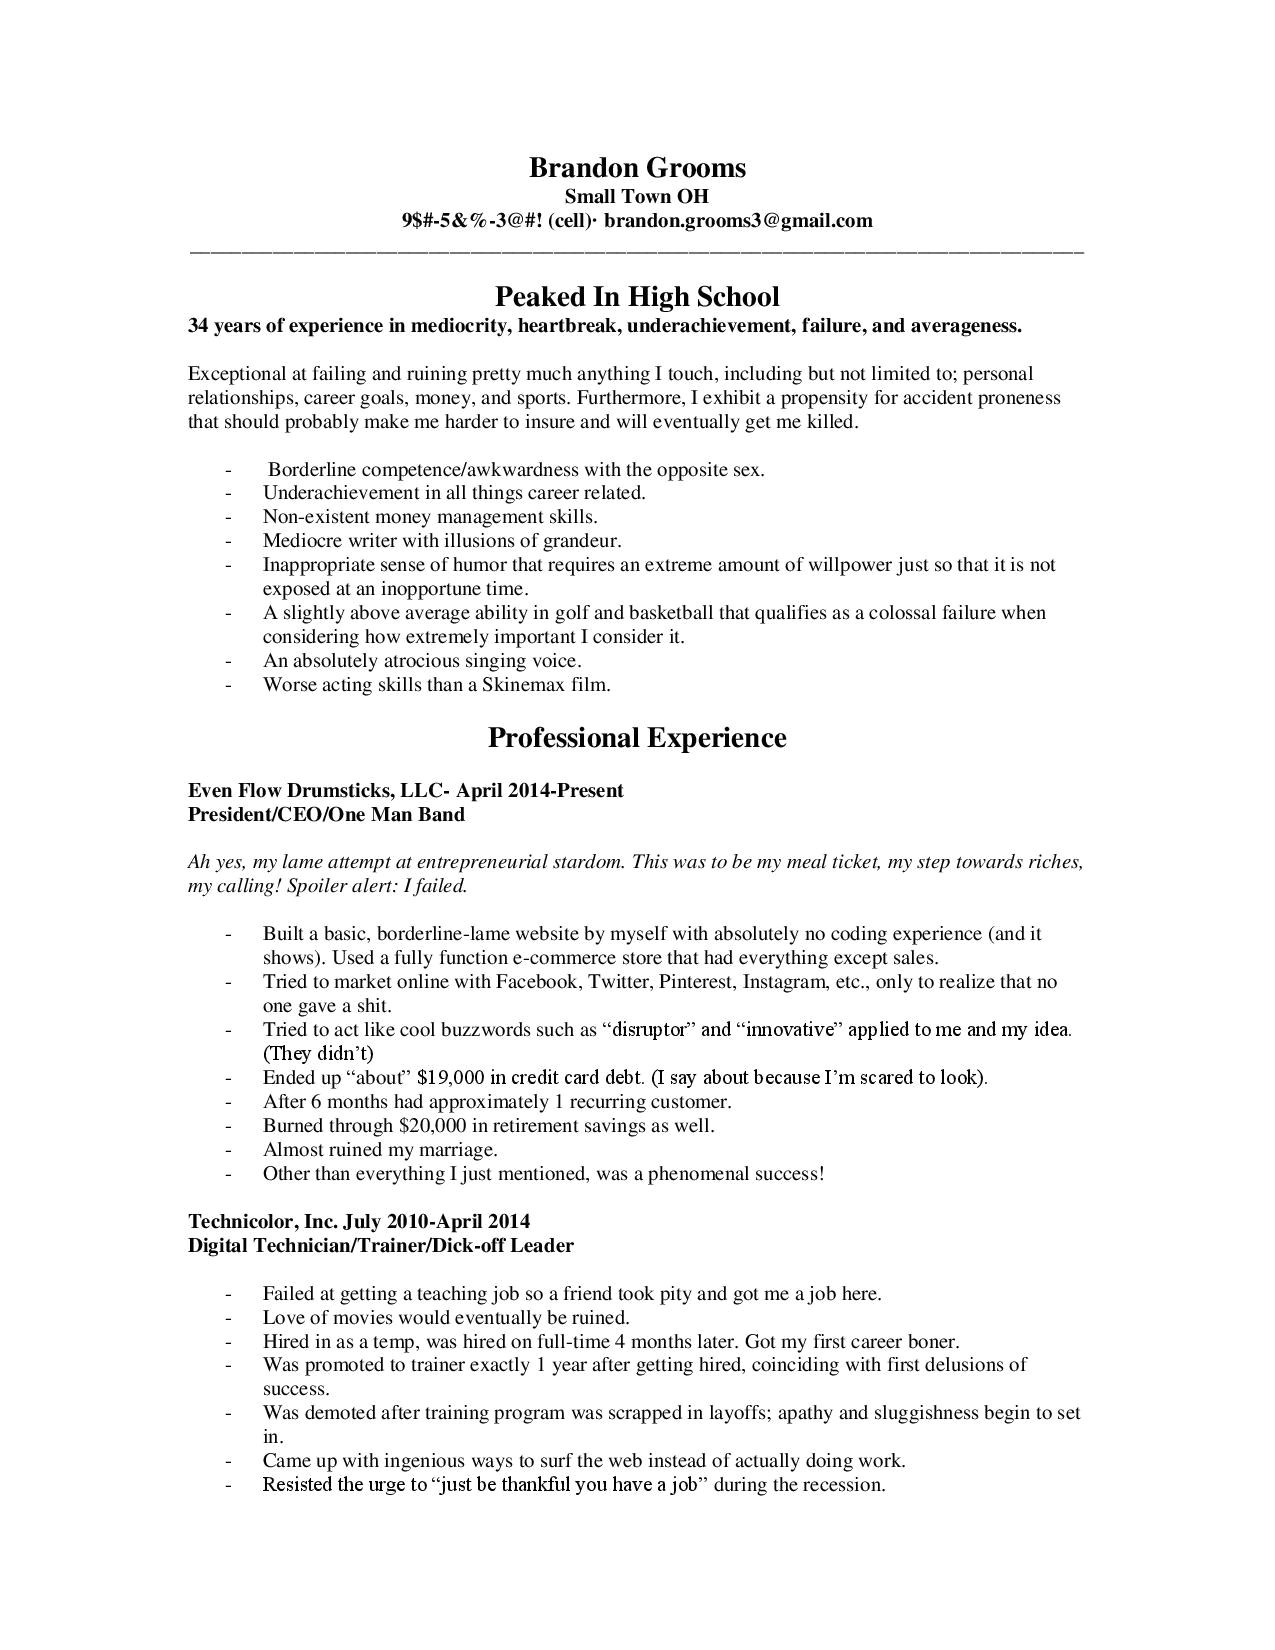 Professional Fonts for Resume 14 What Font Do I Use for A Resume Robbiesavage8 Com